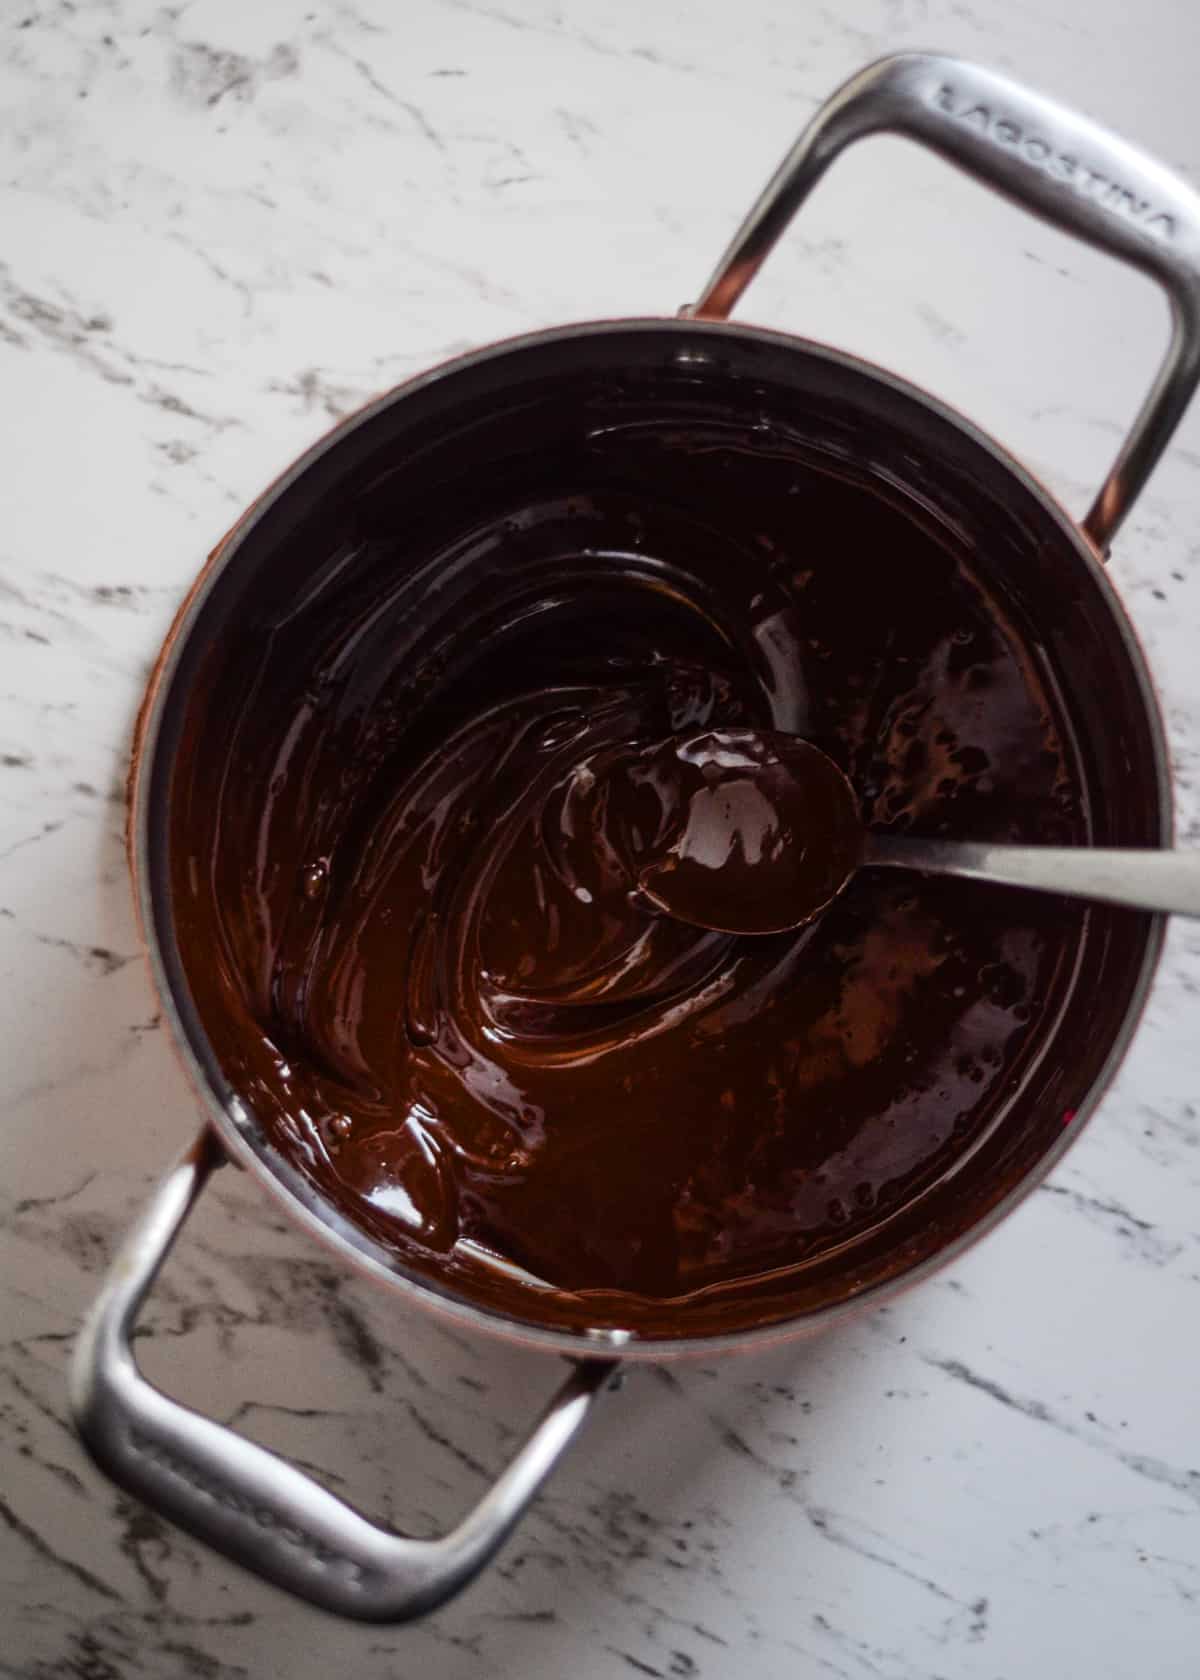 Melted dark chocolate in a pot.